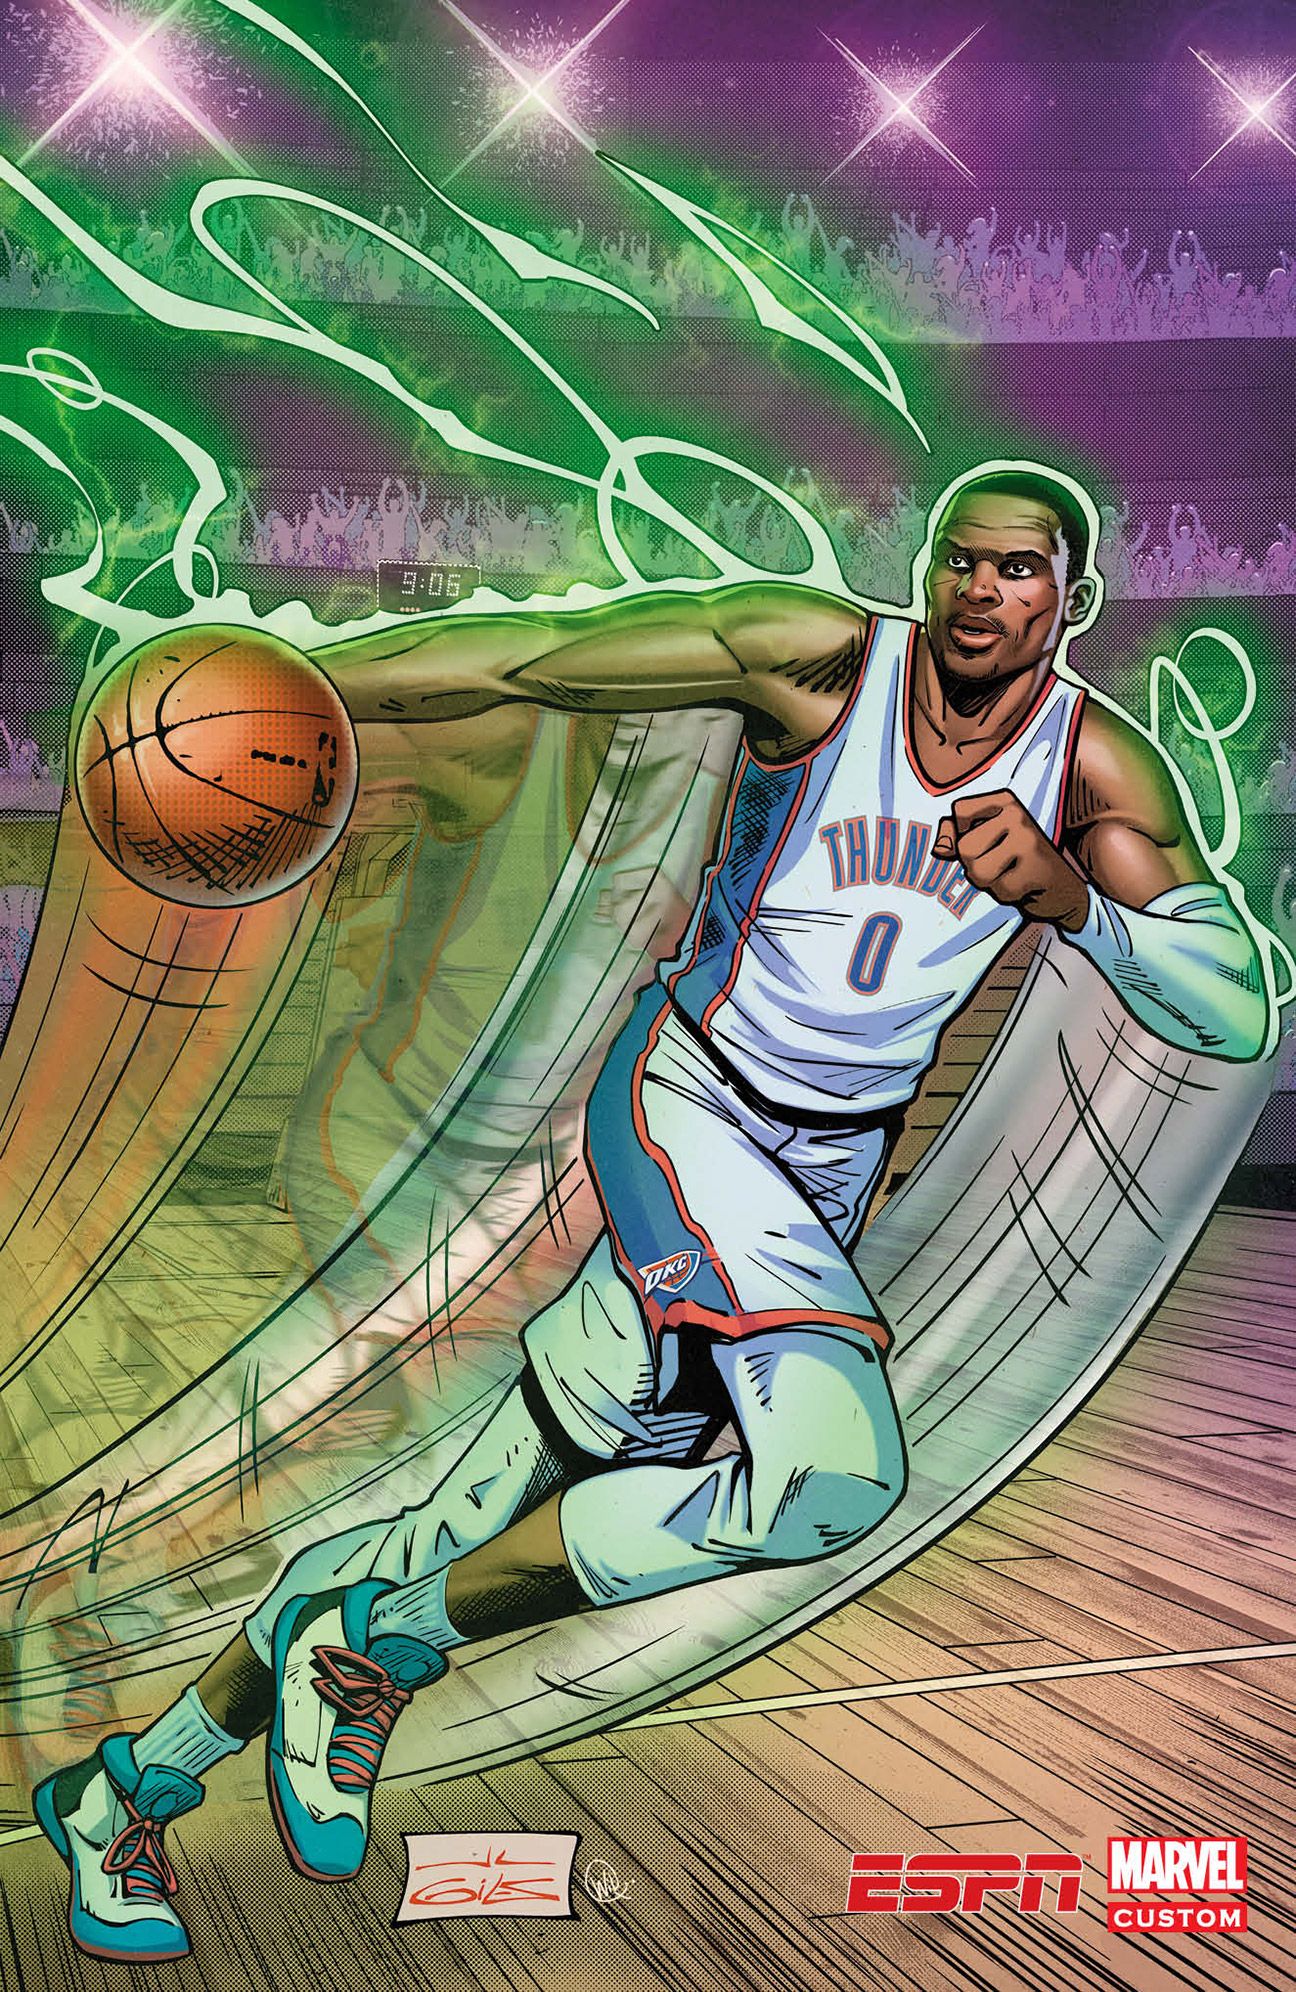 Russell Westbrook by J.L. Giles and Wil Quintana